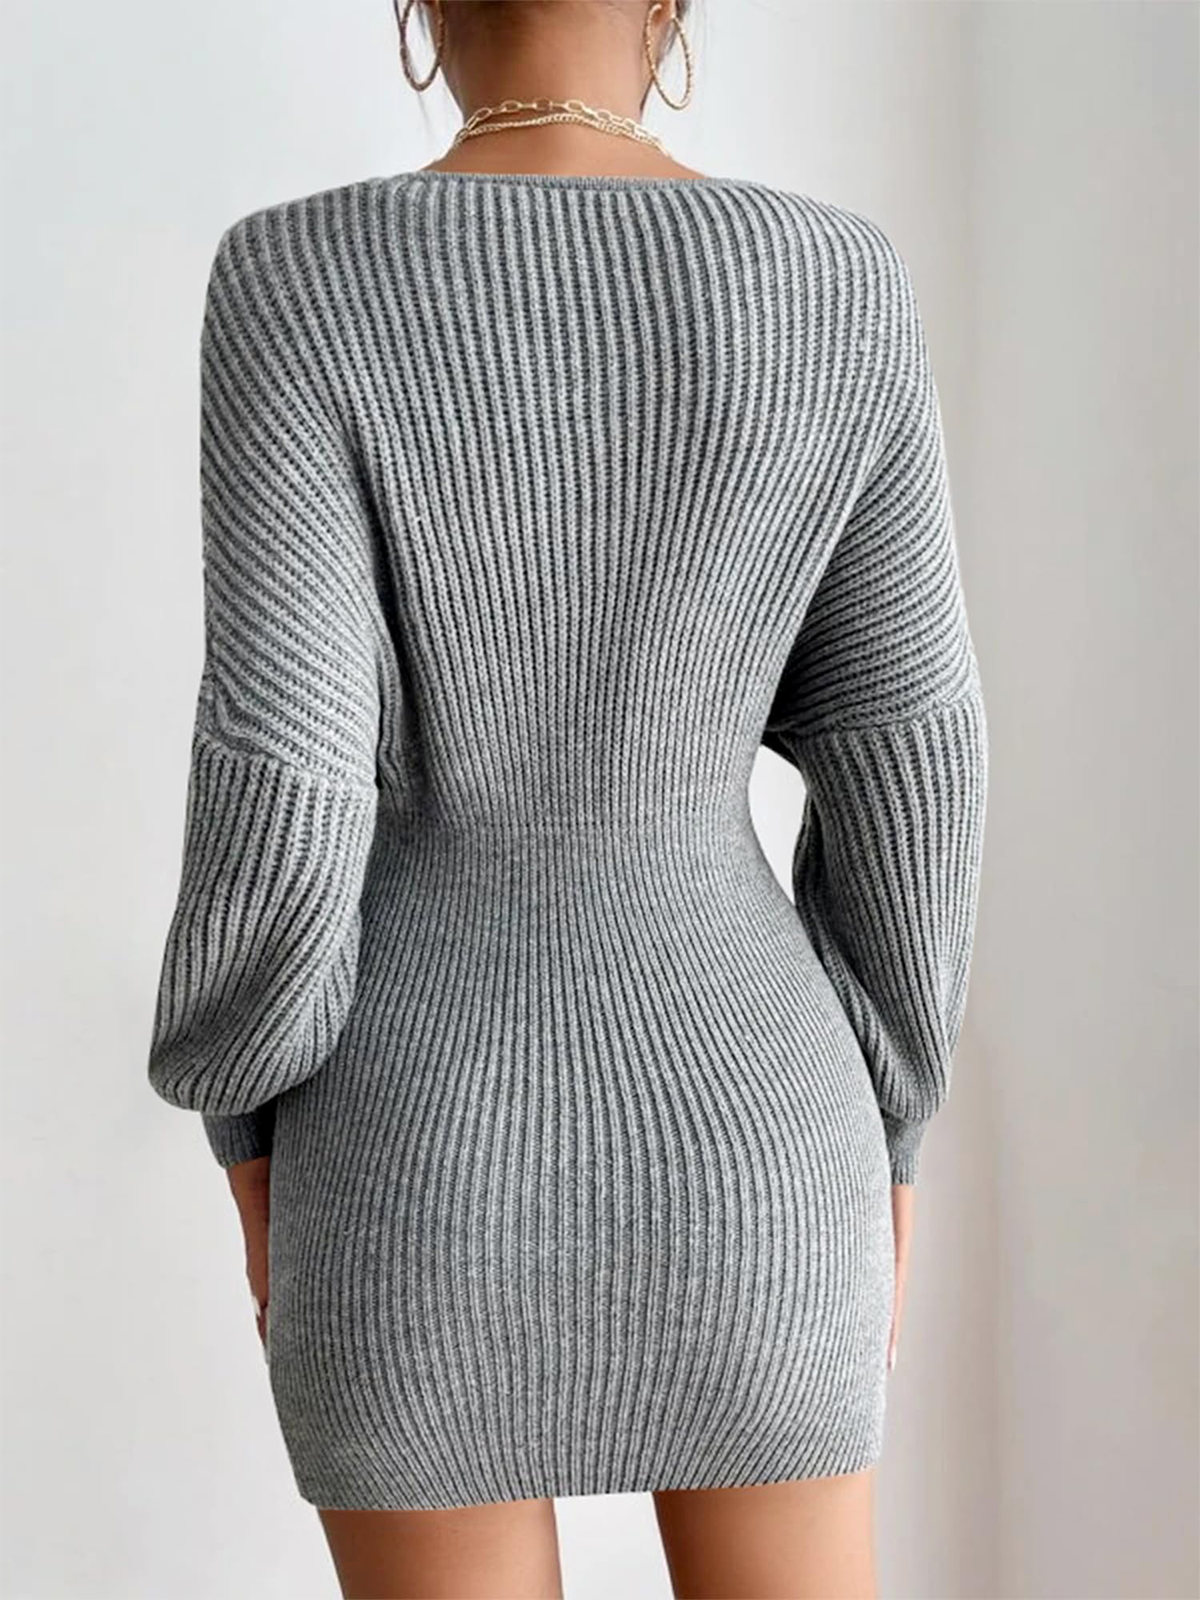 Pleated-Casual-Batwing-Sleeve-Dress-Grey-2